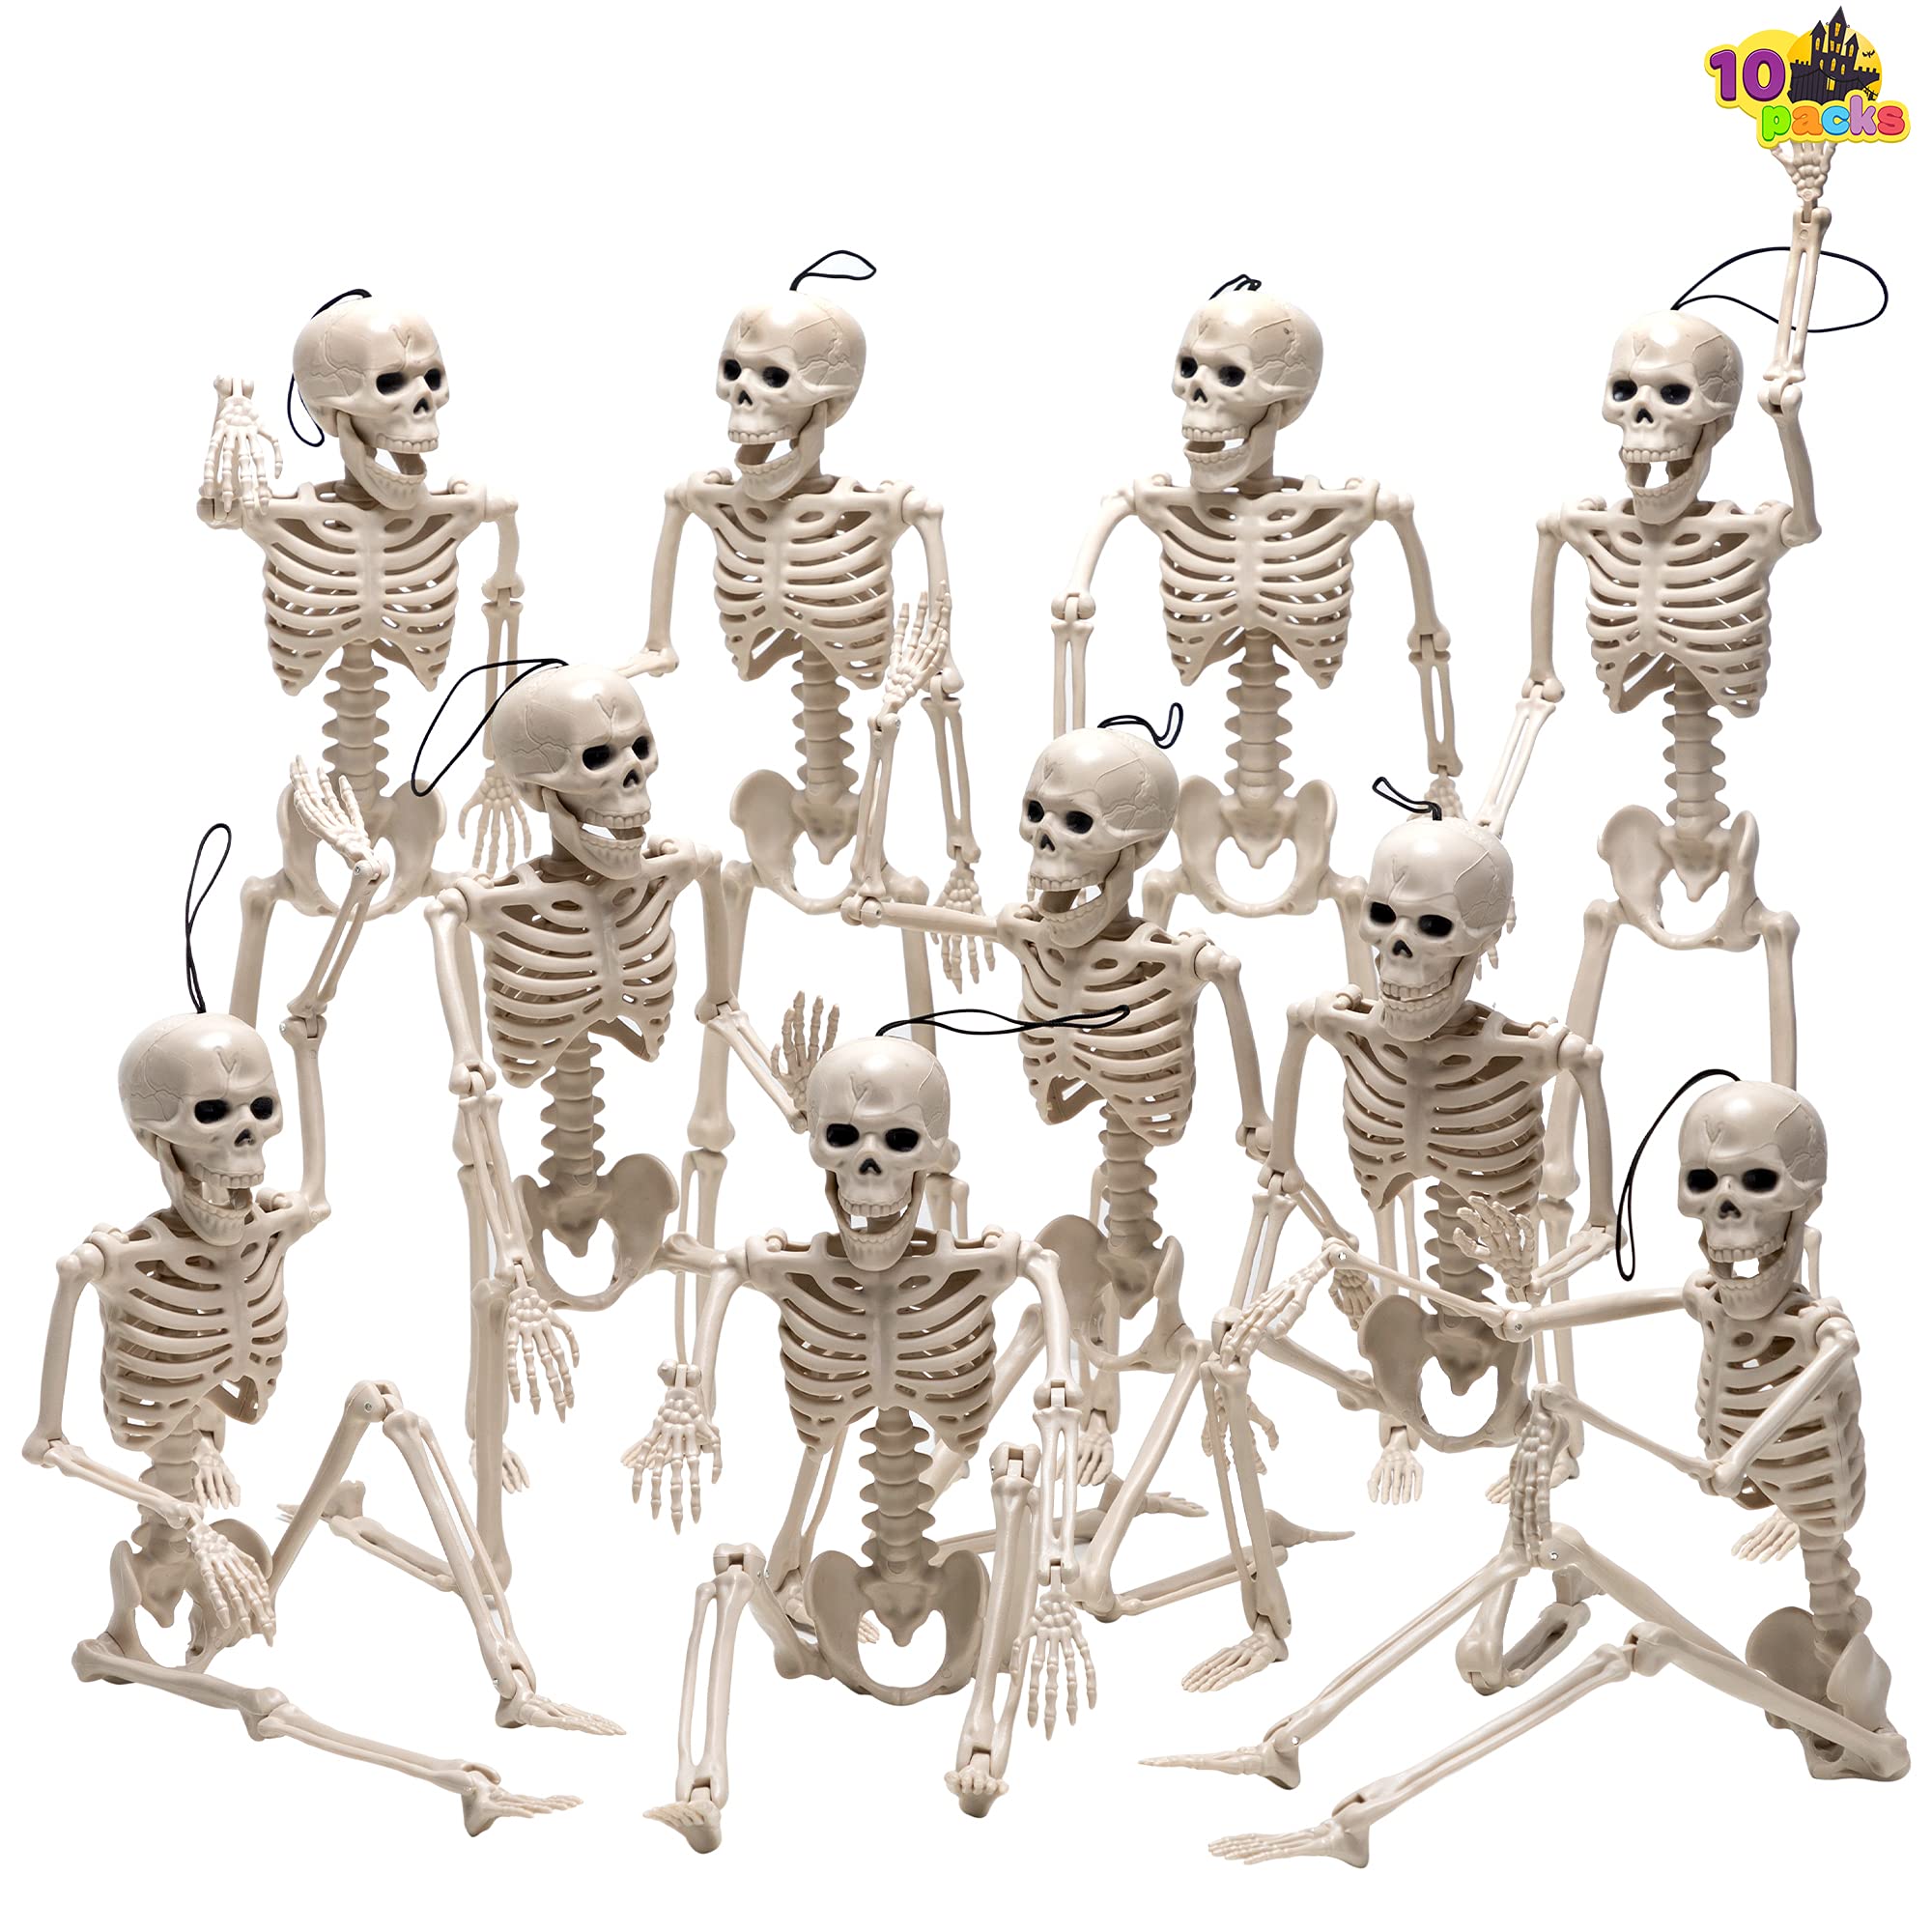 JOYIN 10 Halloween Hanging Skeletons 16” Full Body Stretchy Realistic Human Plastic Bones with Movable Posable Joints for Halloween Indoor Outdoor Party Decor, Graveyard Decorations, Haunted House Photo Prop Accessories